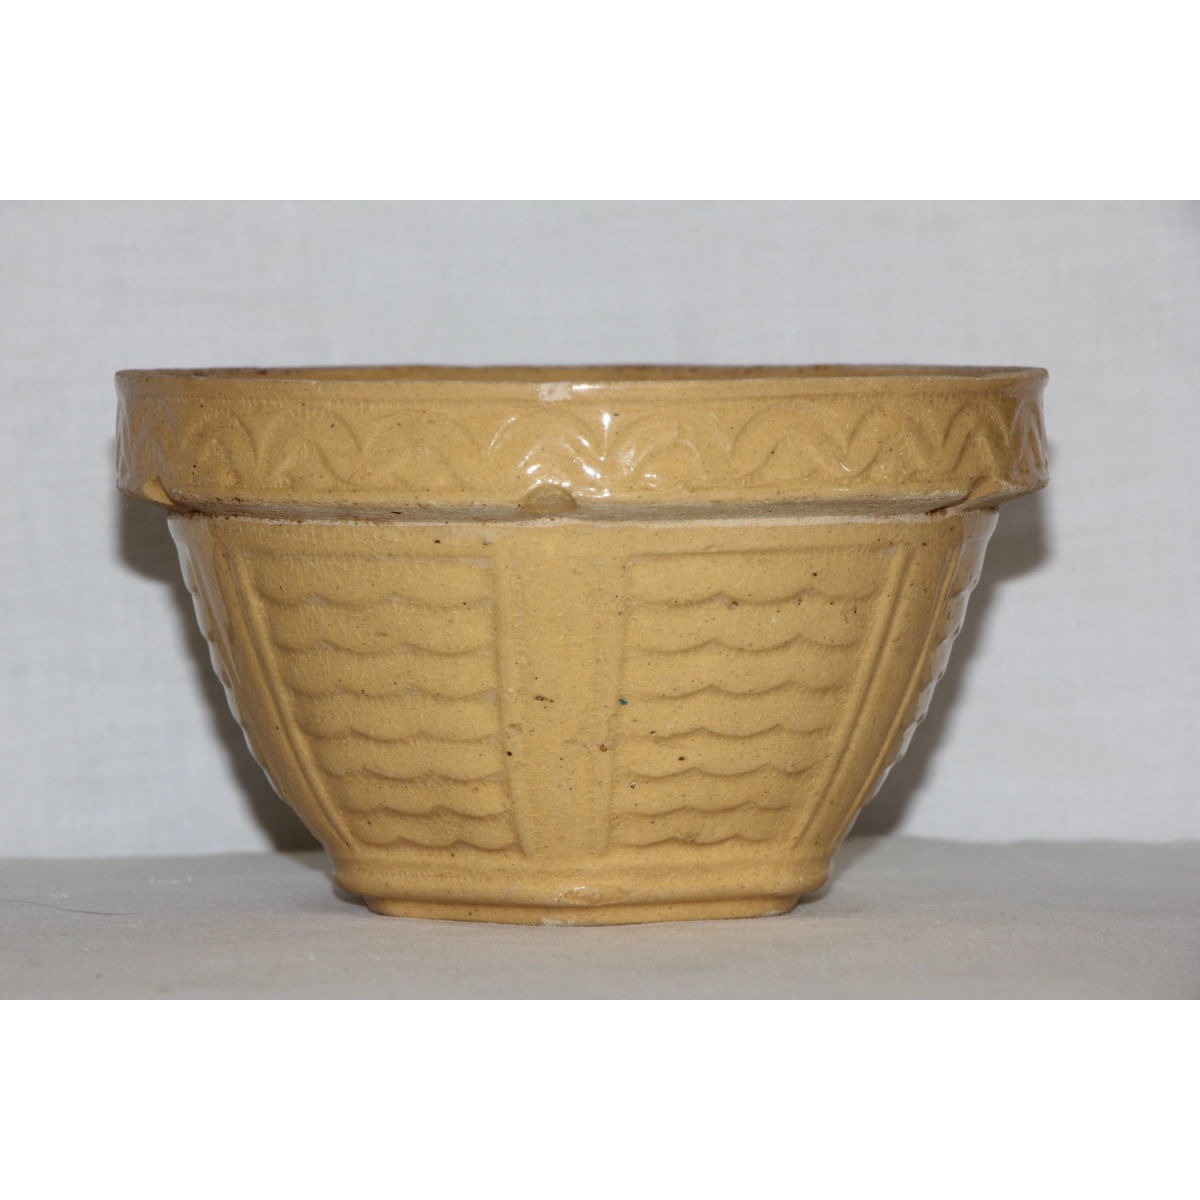 Unusual Yellow not Green-Glazed 6" Waves and Bars Bowl